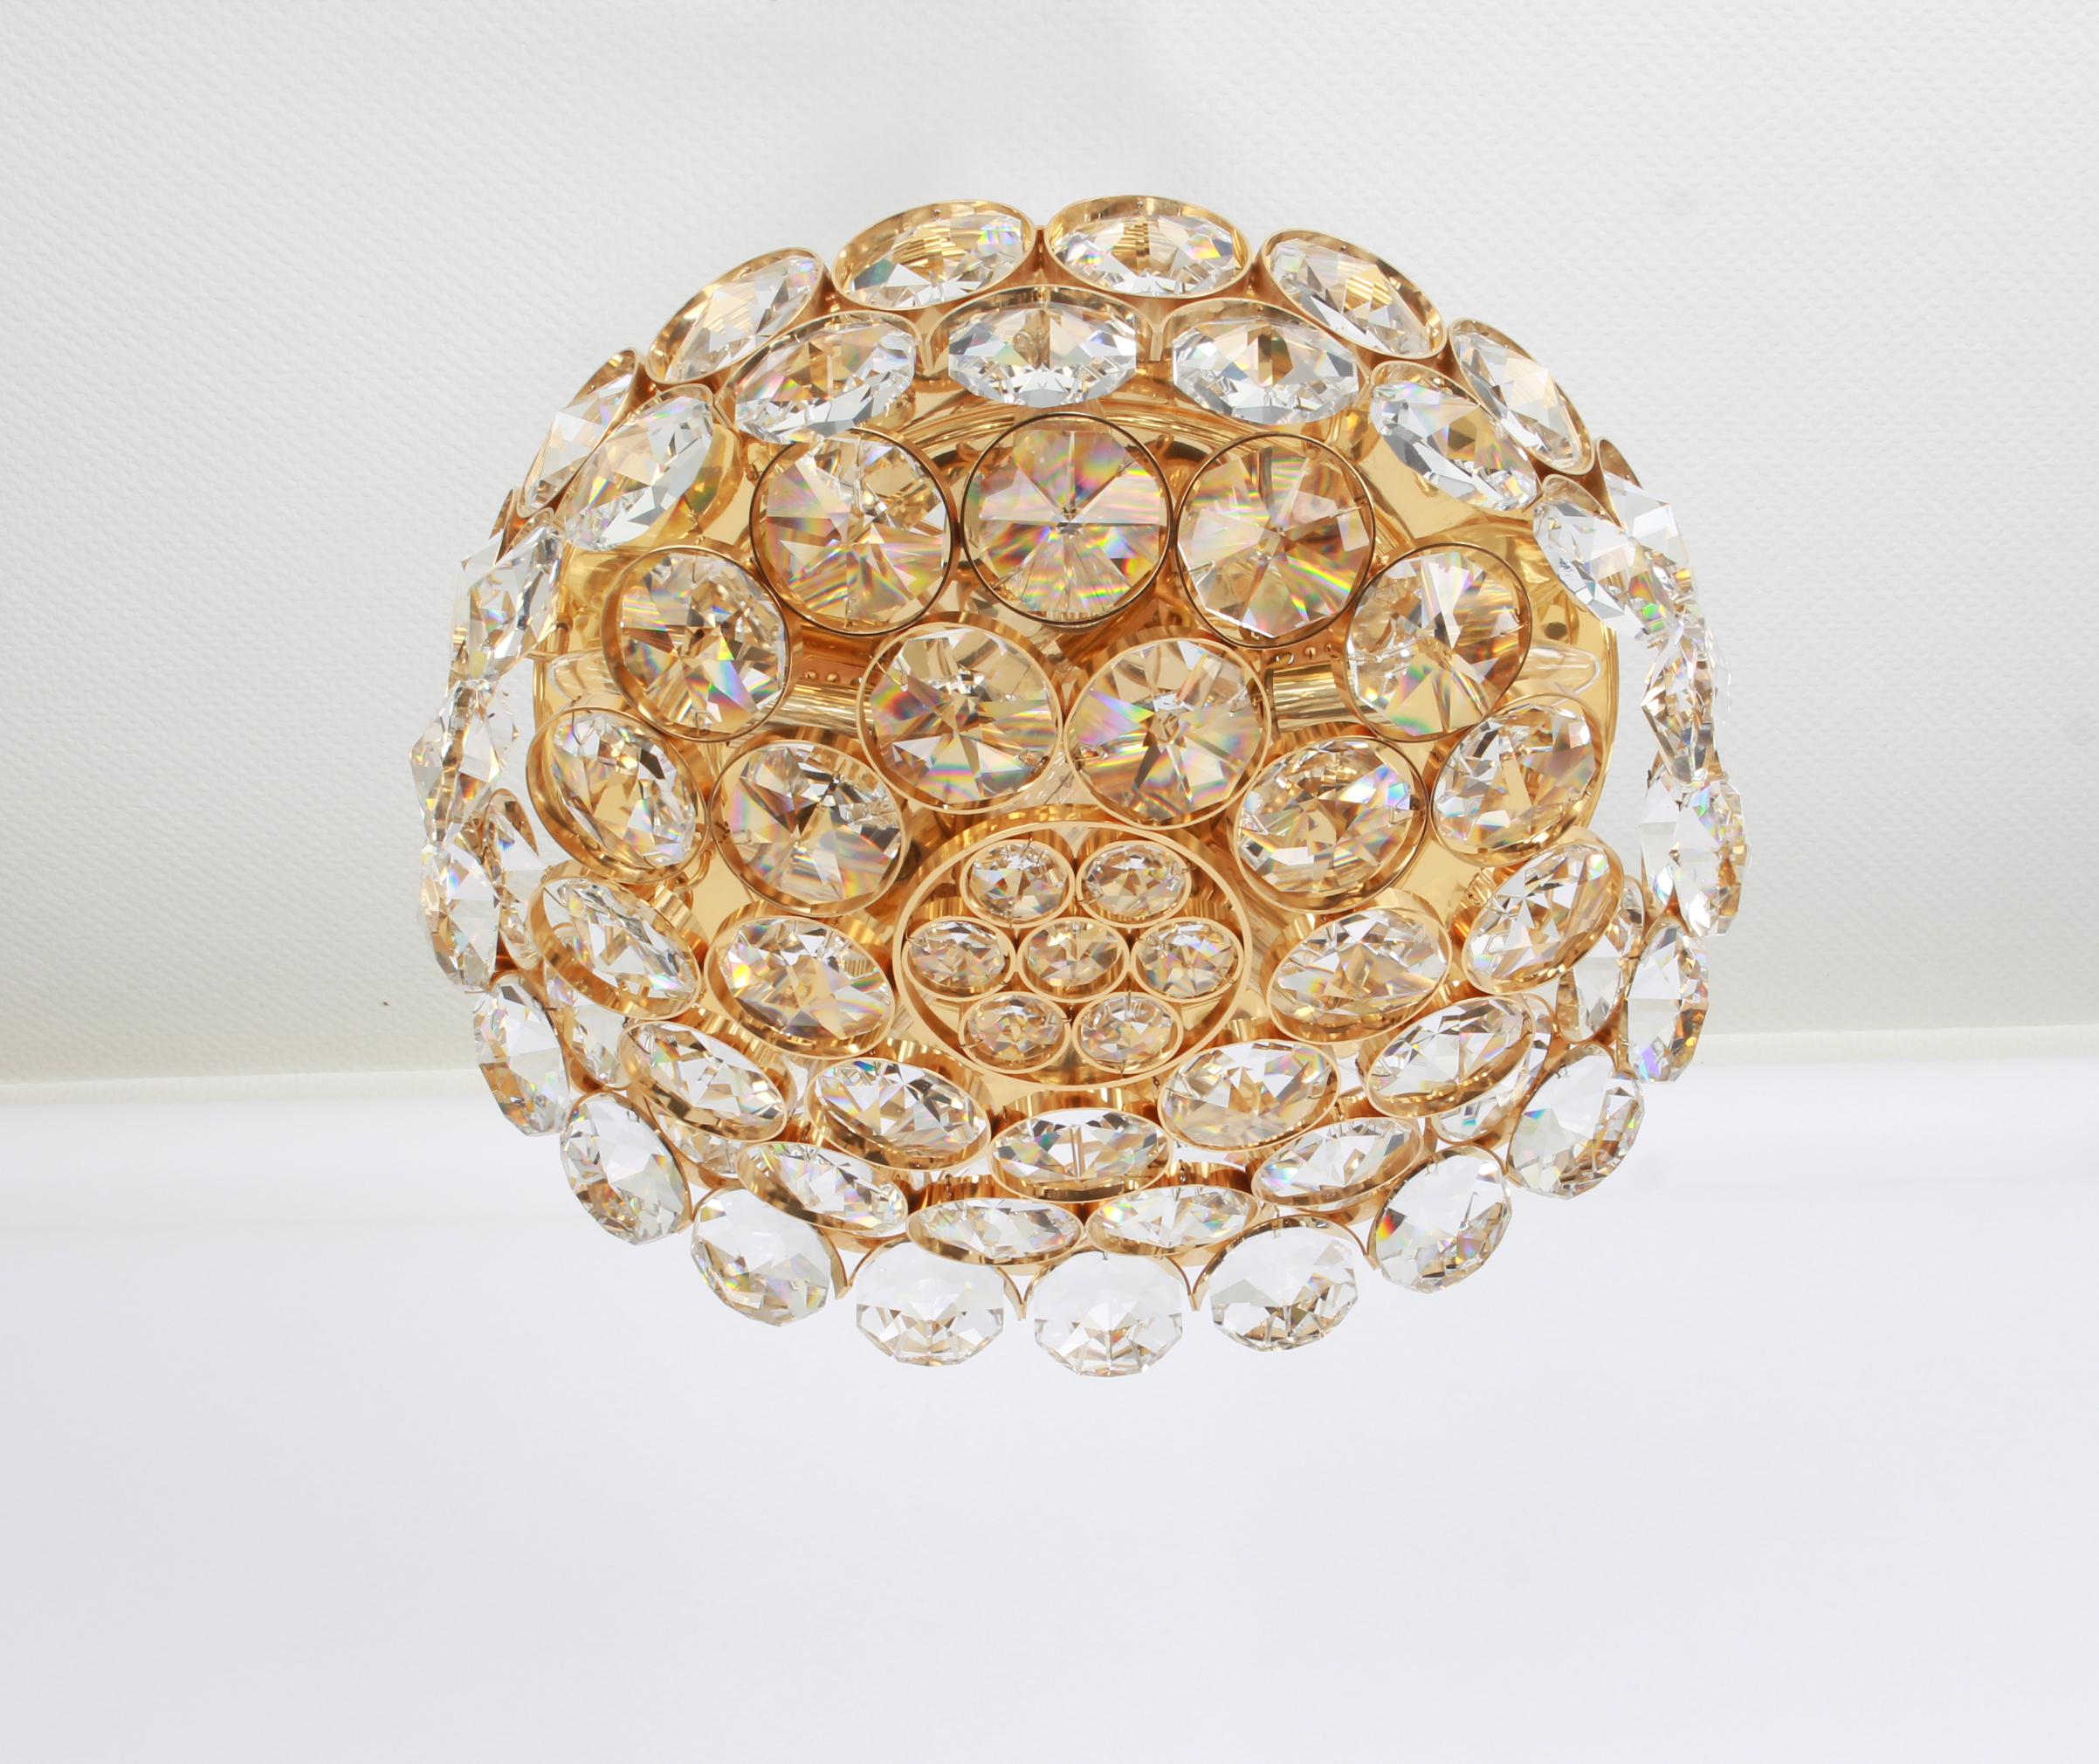 A wonderful and high quality gilded chandelier / flushmount light fixture by Palwa (Palme & Walter), Germany, 1970s

It is made of a 24-carat gold-plated brass frame decorated with hundreds of cut crystal glass. The bottom is made of a round